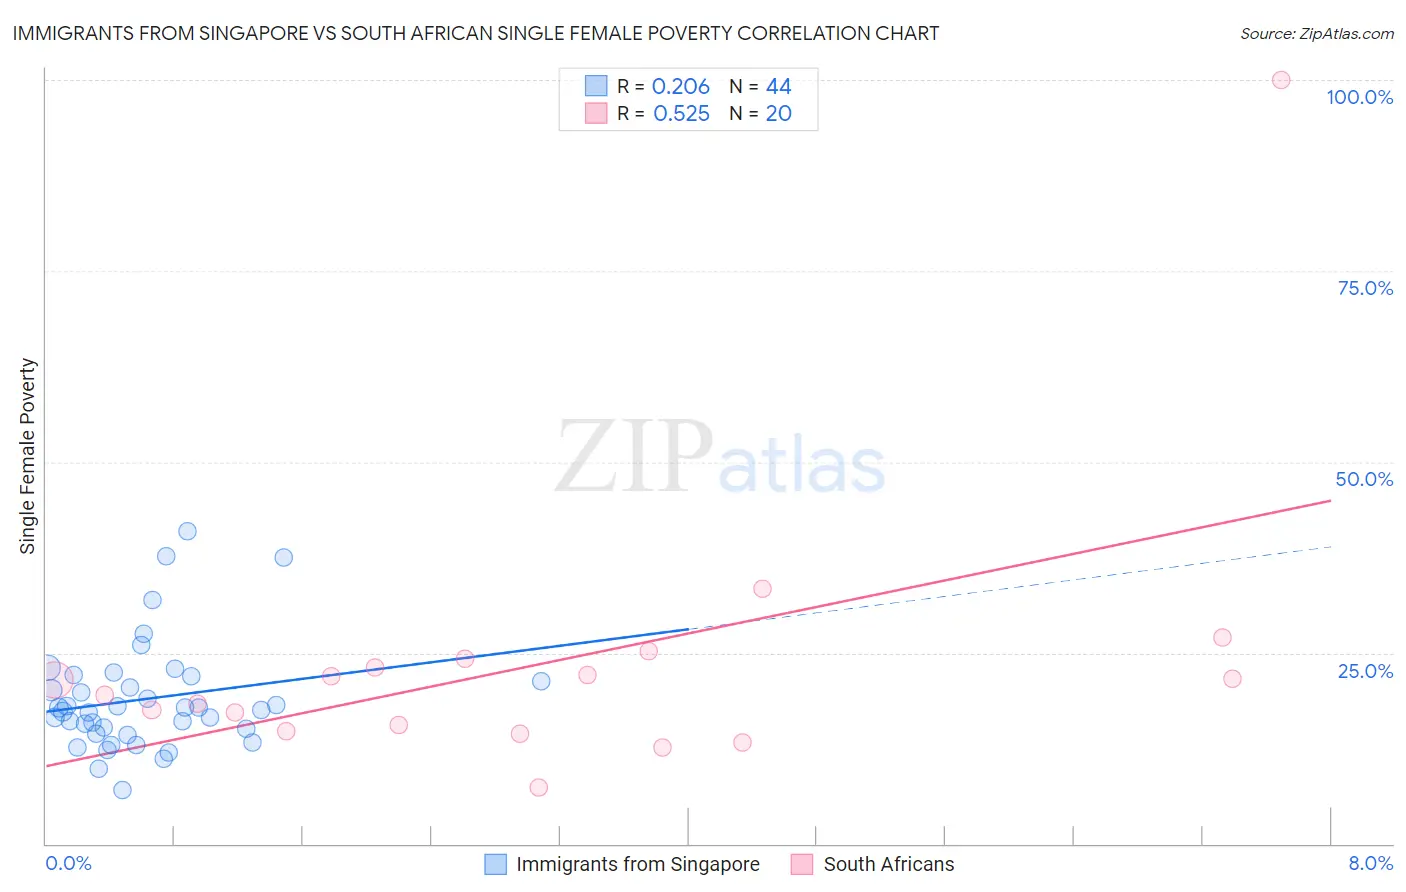 Immigrants from Singapore vs South African Single Female Poverty